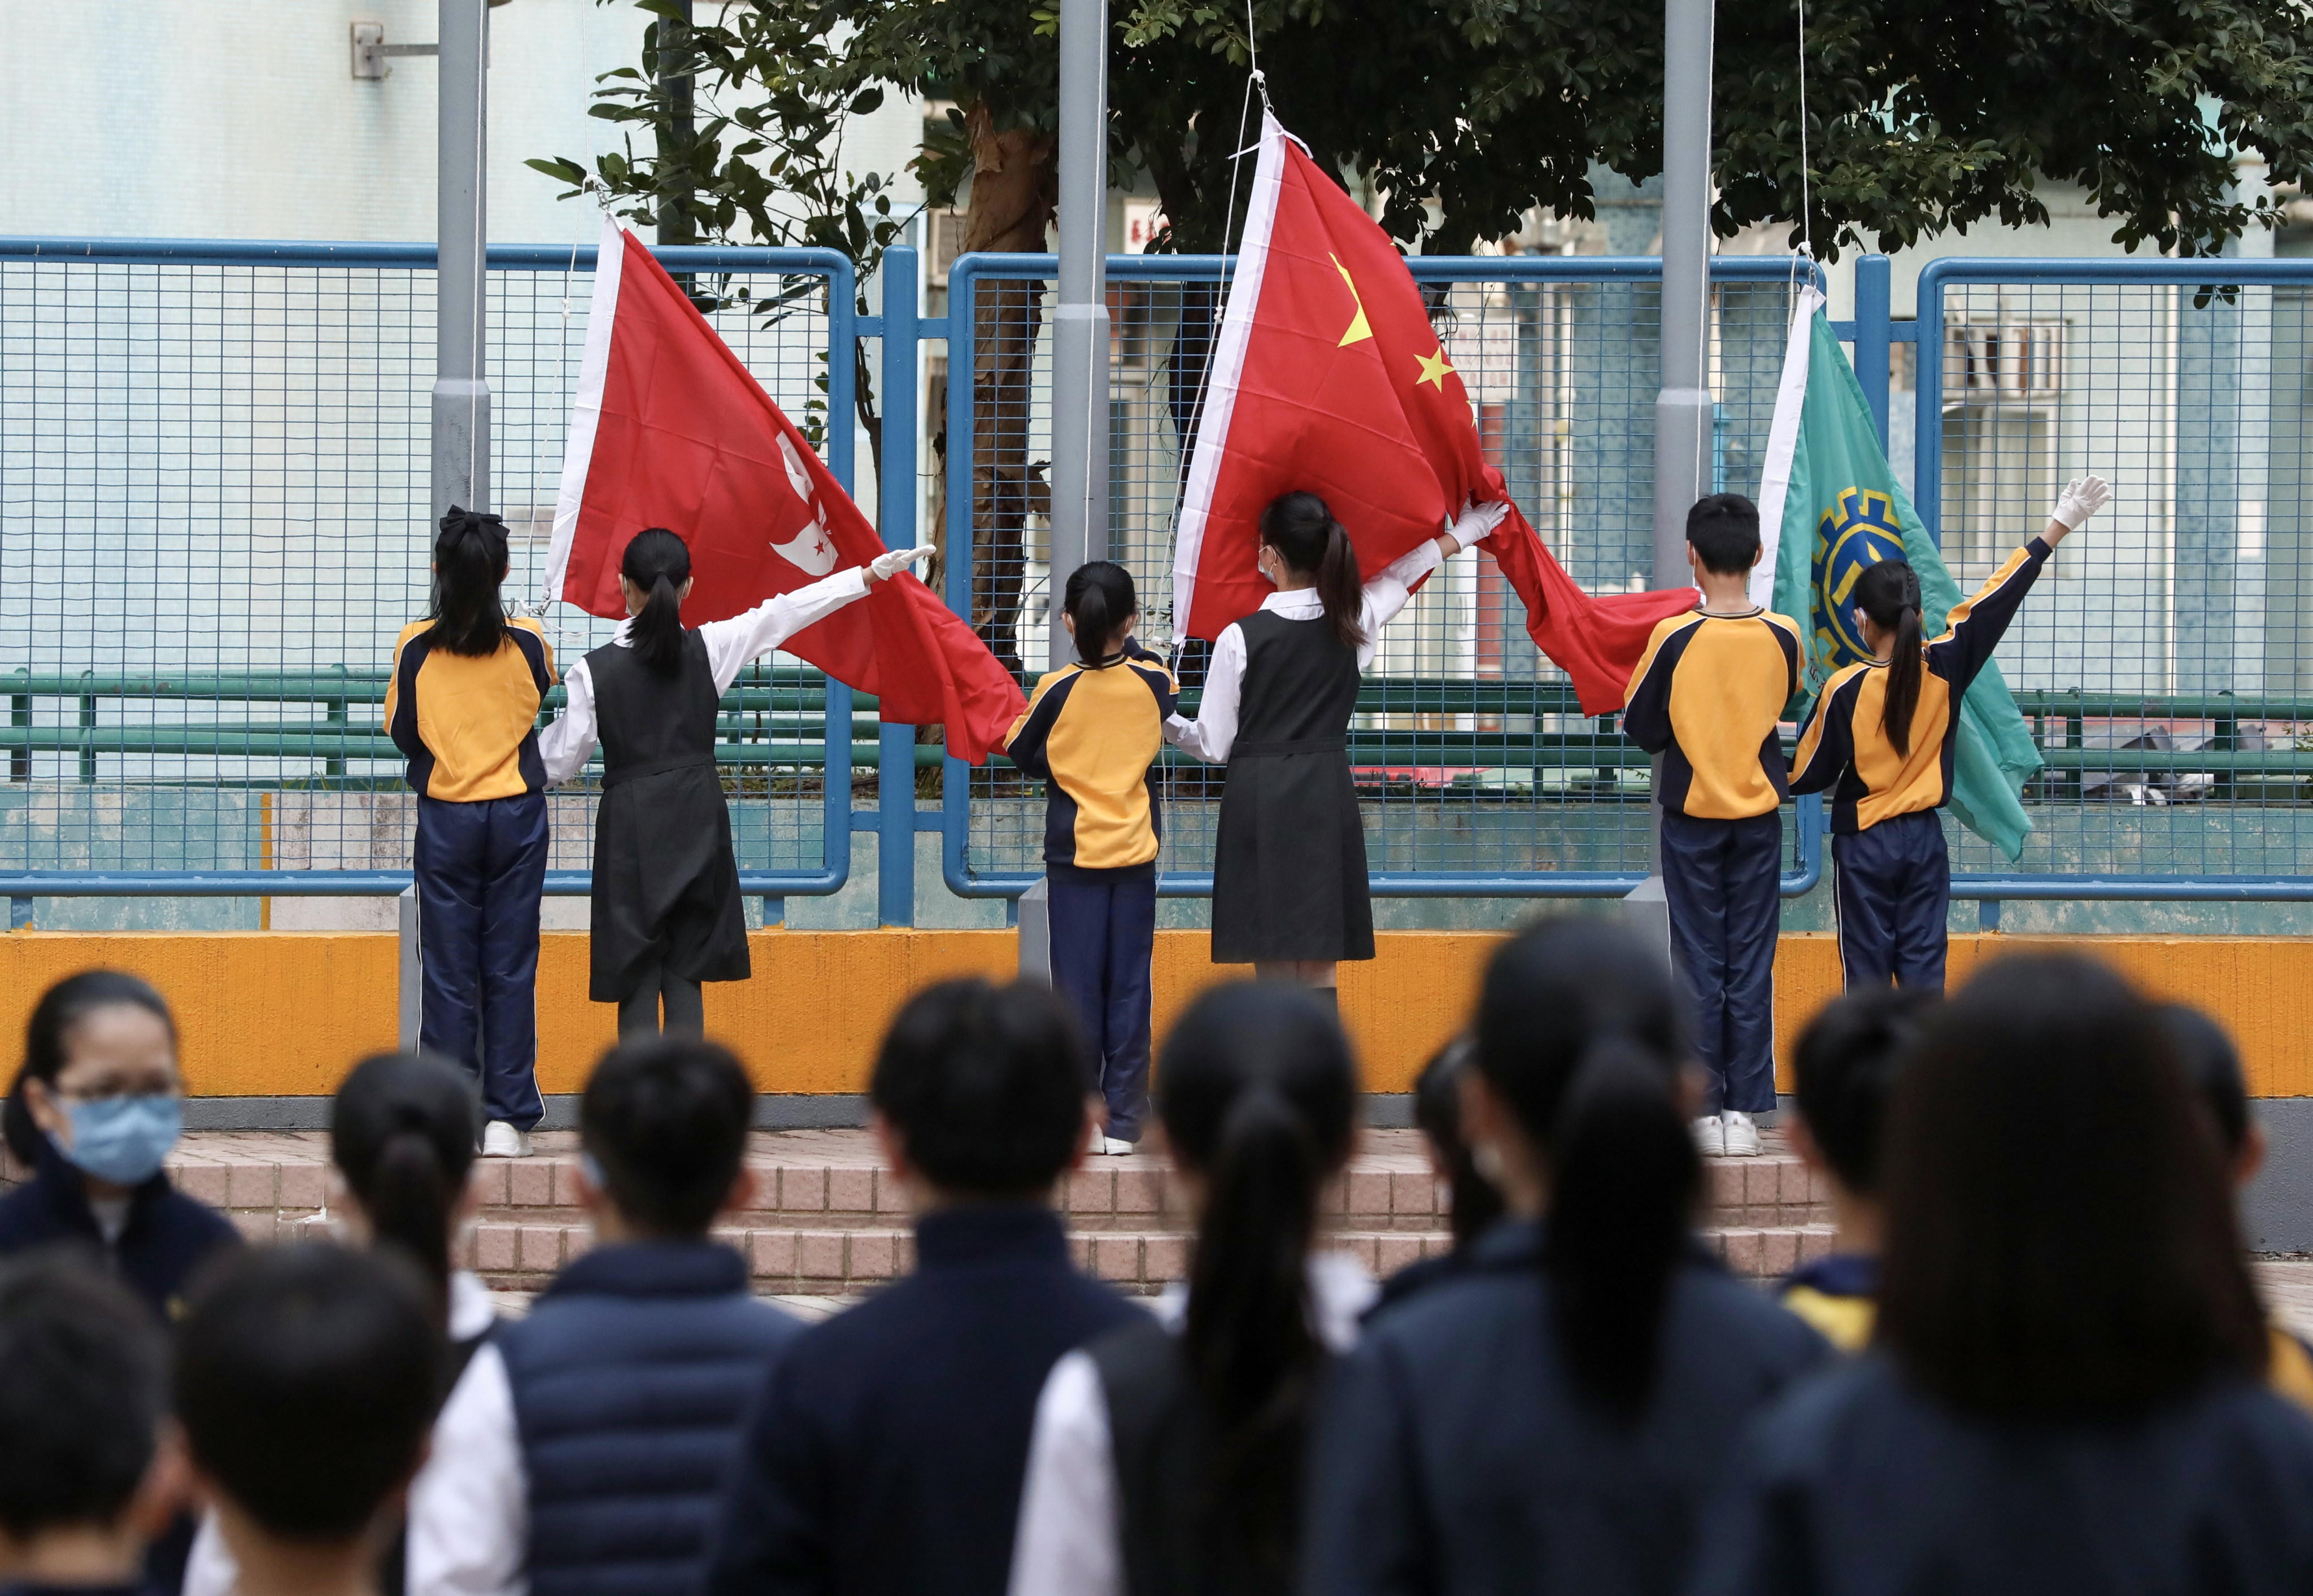 National education activities, such as flag-raising ceremonies, are to instil a sense of identity in students, a minister has said. Photo: Jonathan Wong